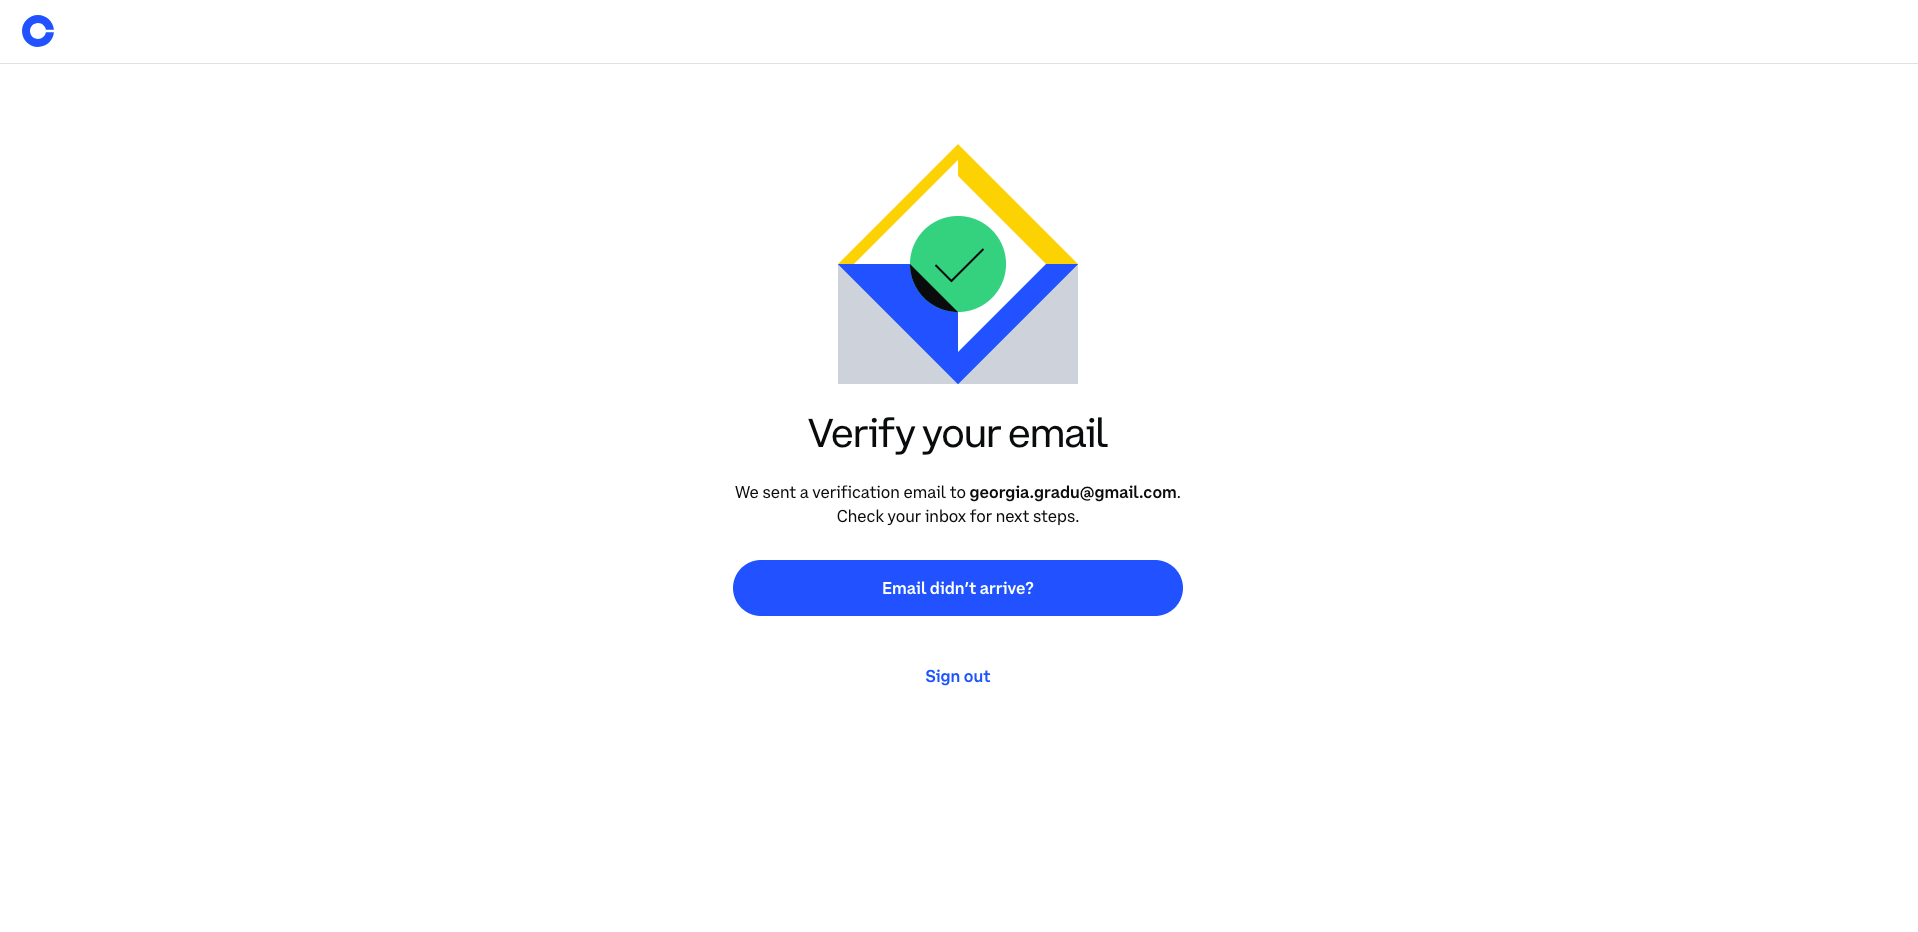 3. Verify your email through the email you received from Coinbase;  